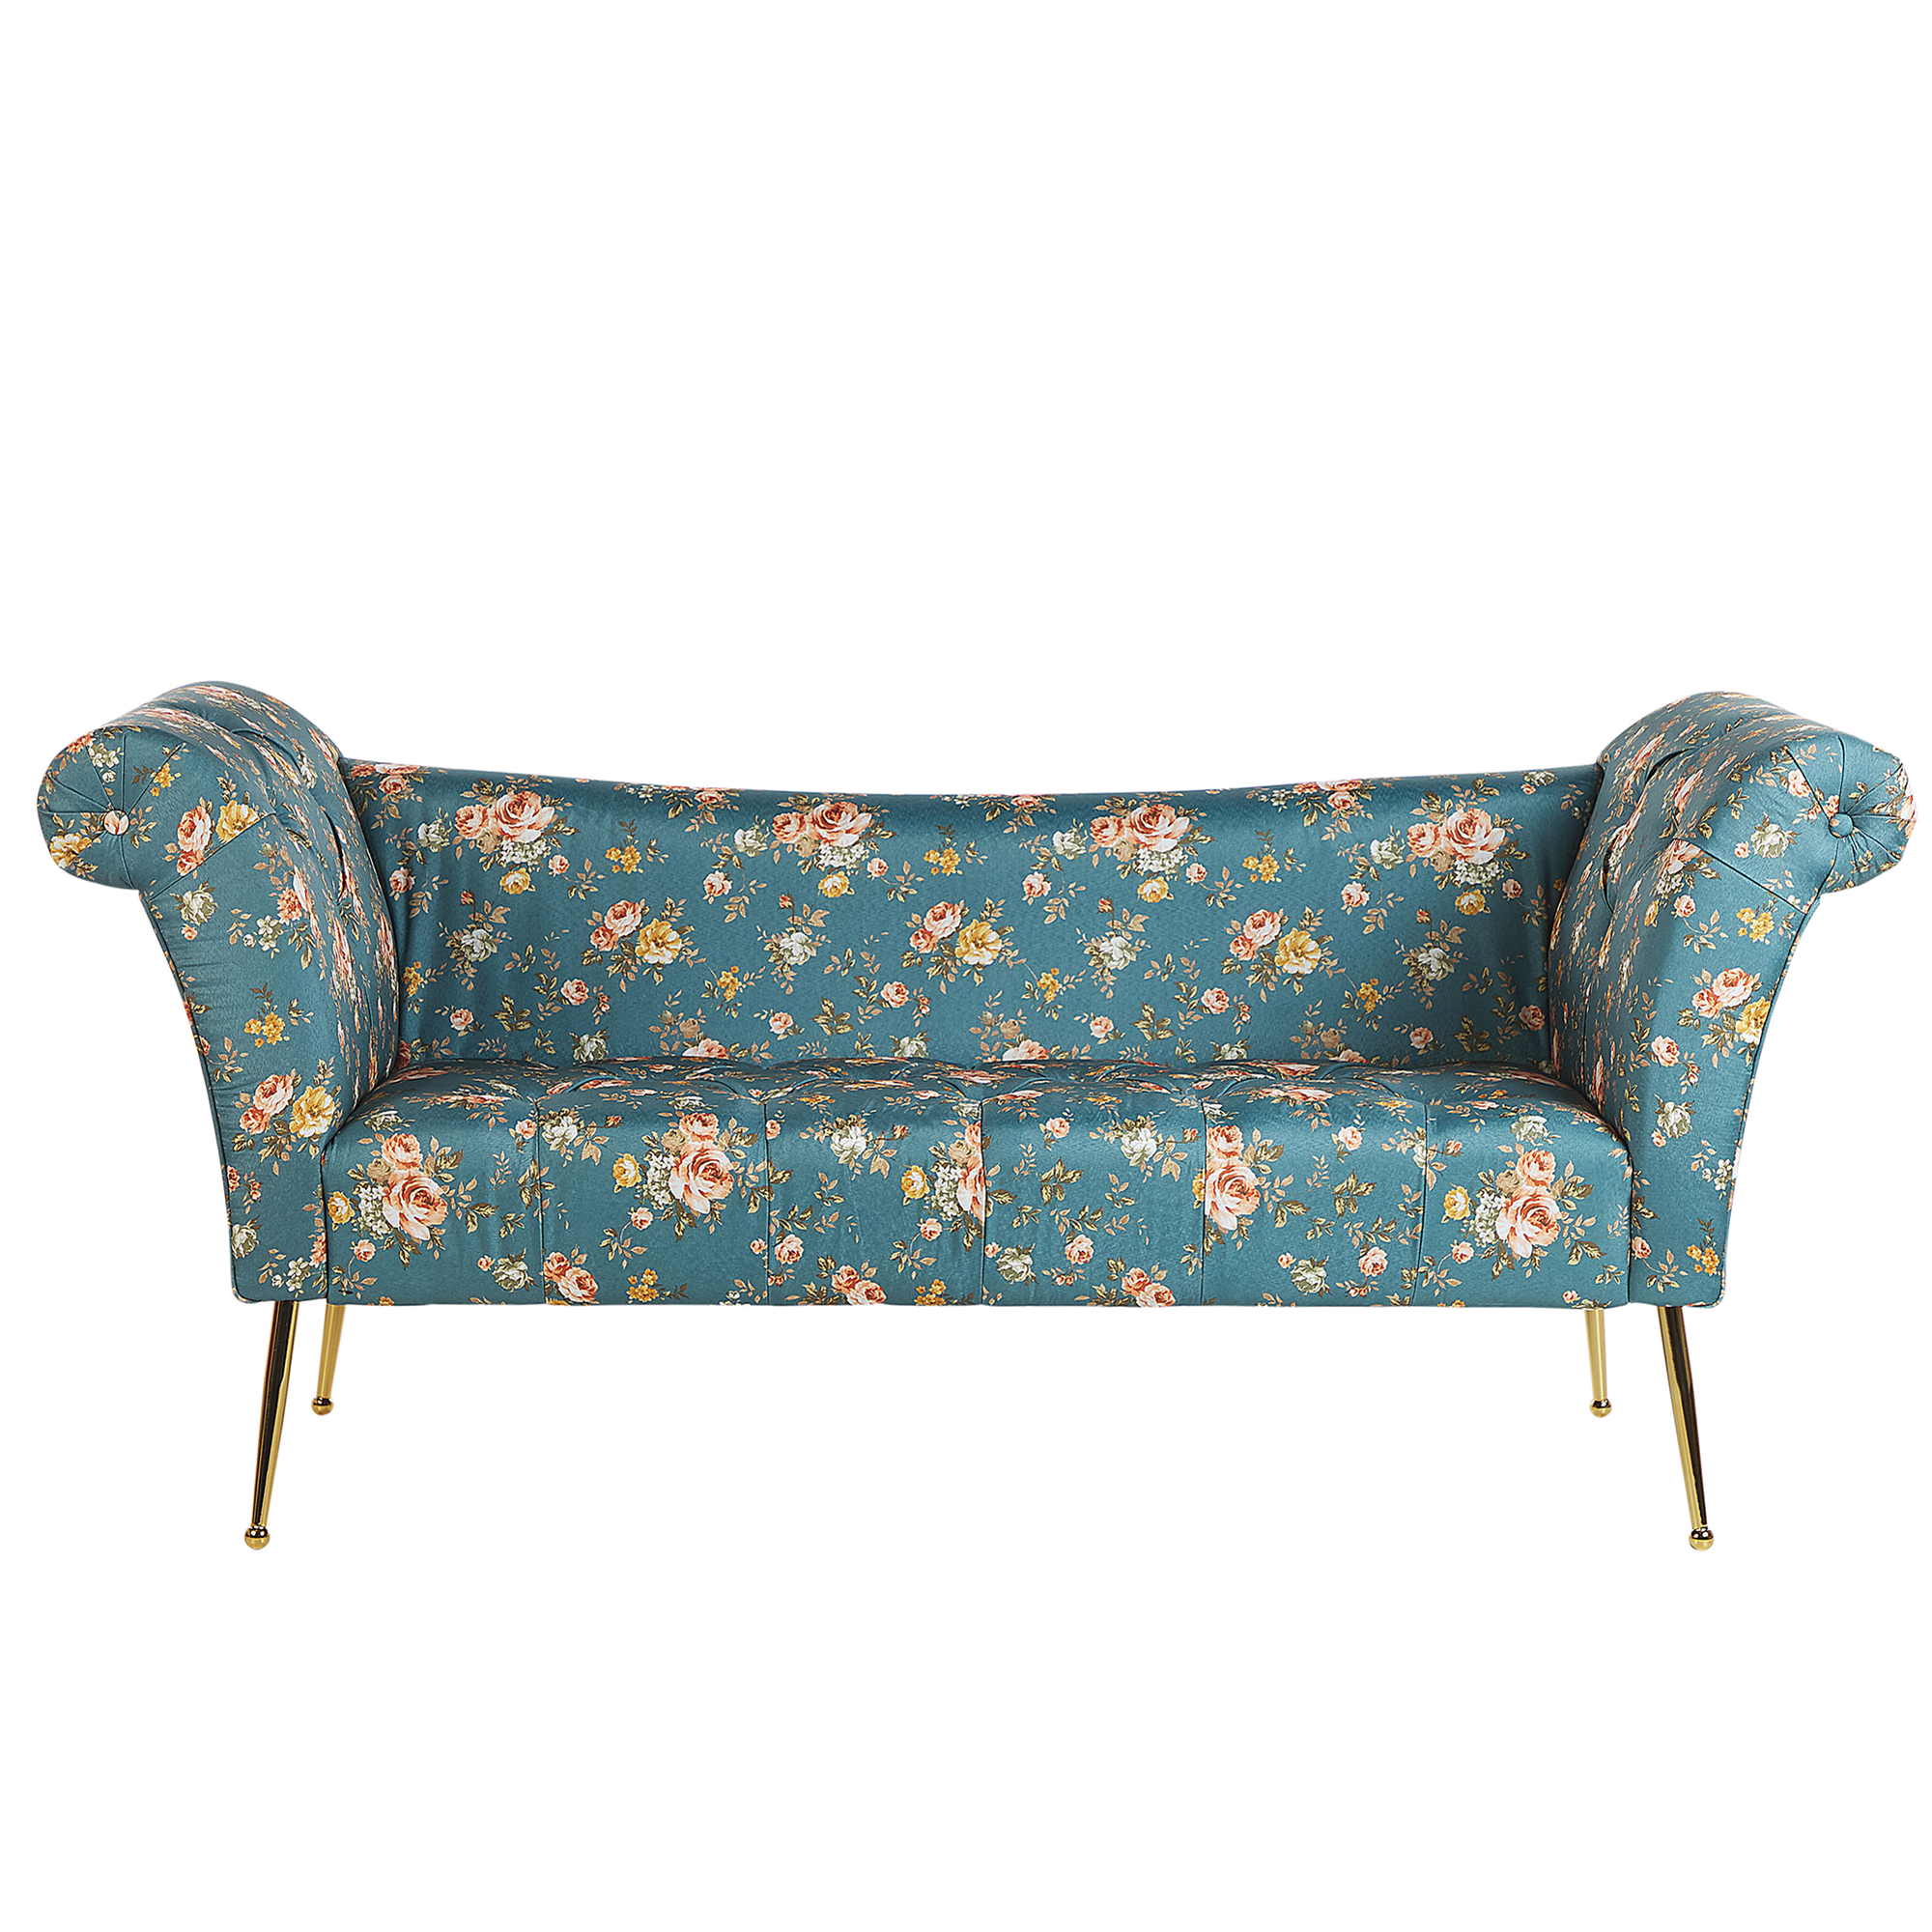 Beliani Chaise Lounge Blue Fabric Upholstery Tufted Double Ended Seat with Metal Gold Legs